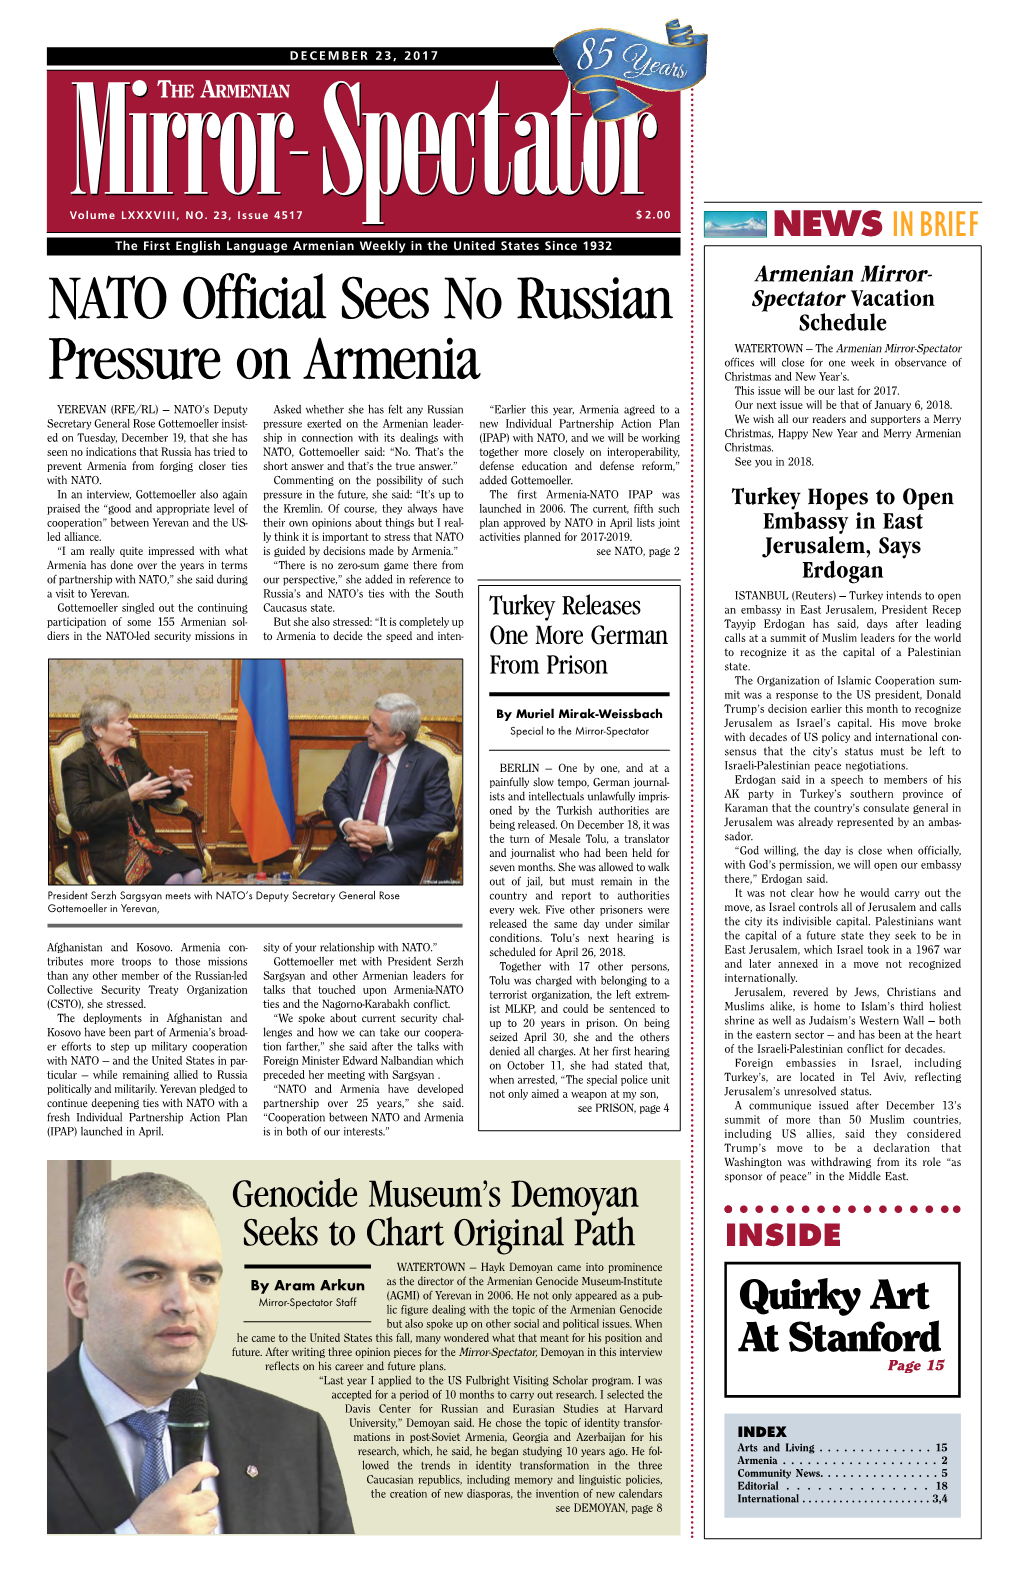 NATO Official Sees No Russian Pressure on Armenia